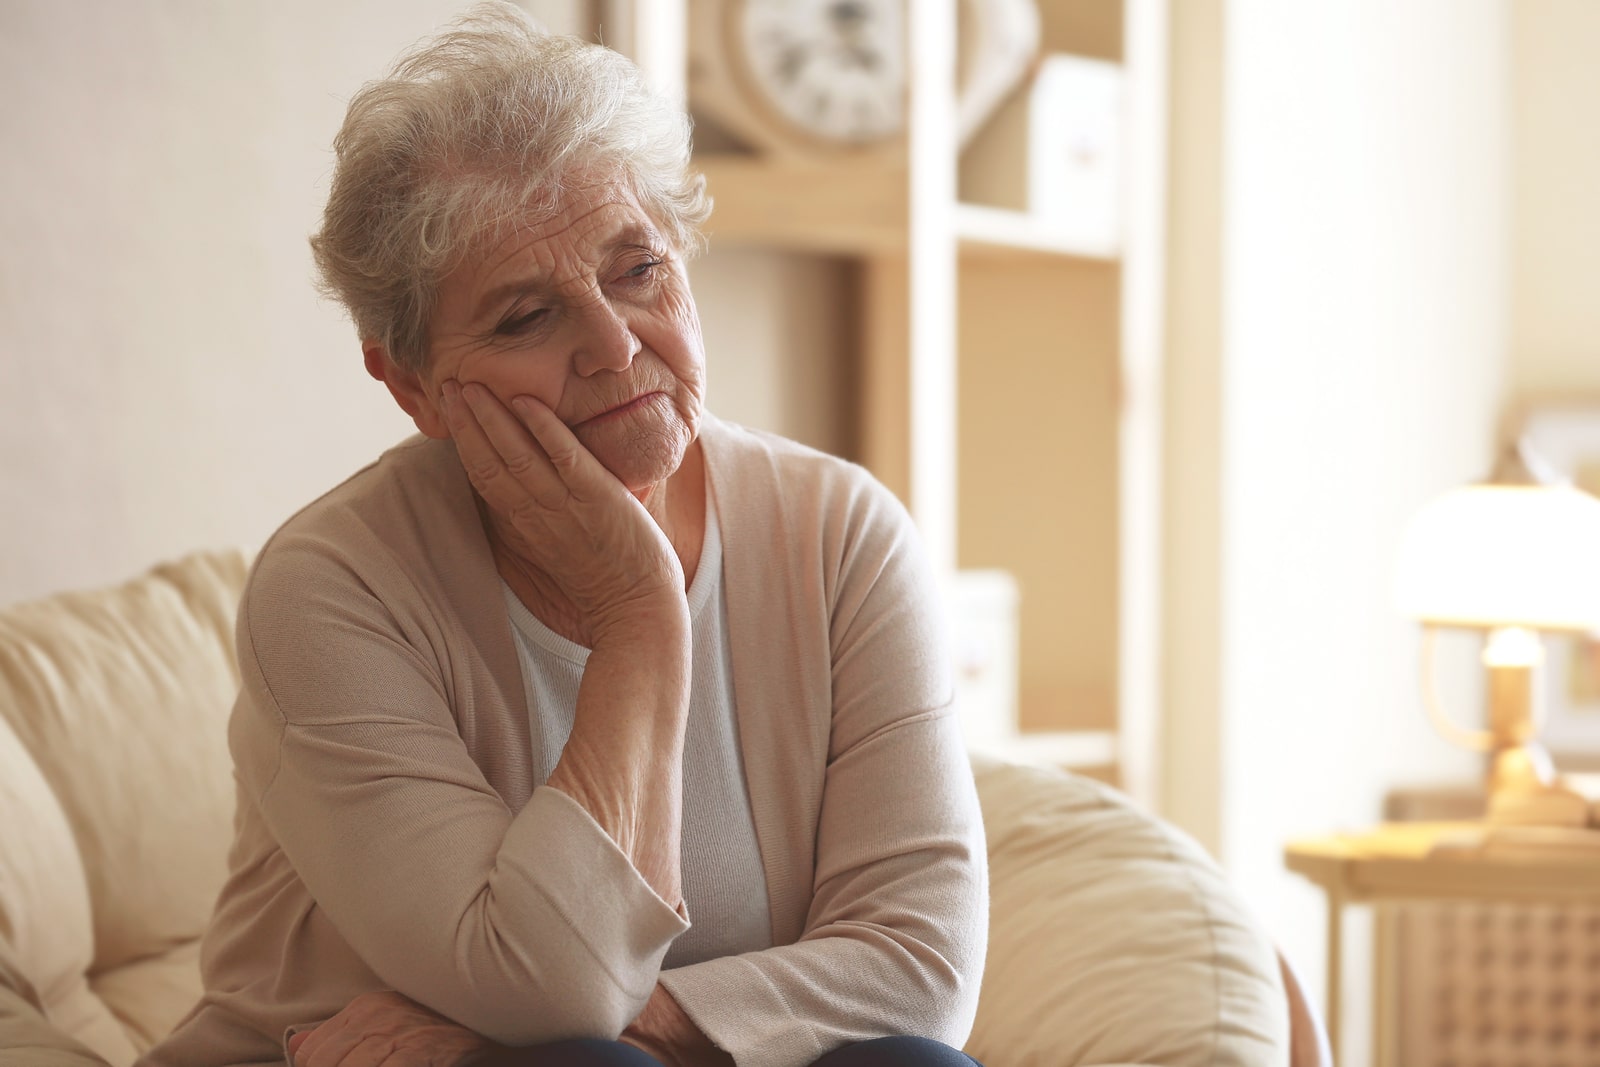 Is Your Elderly Loved One Under A Lot of Stress?